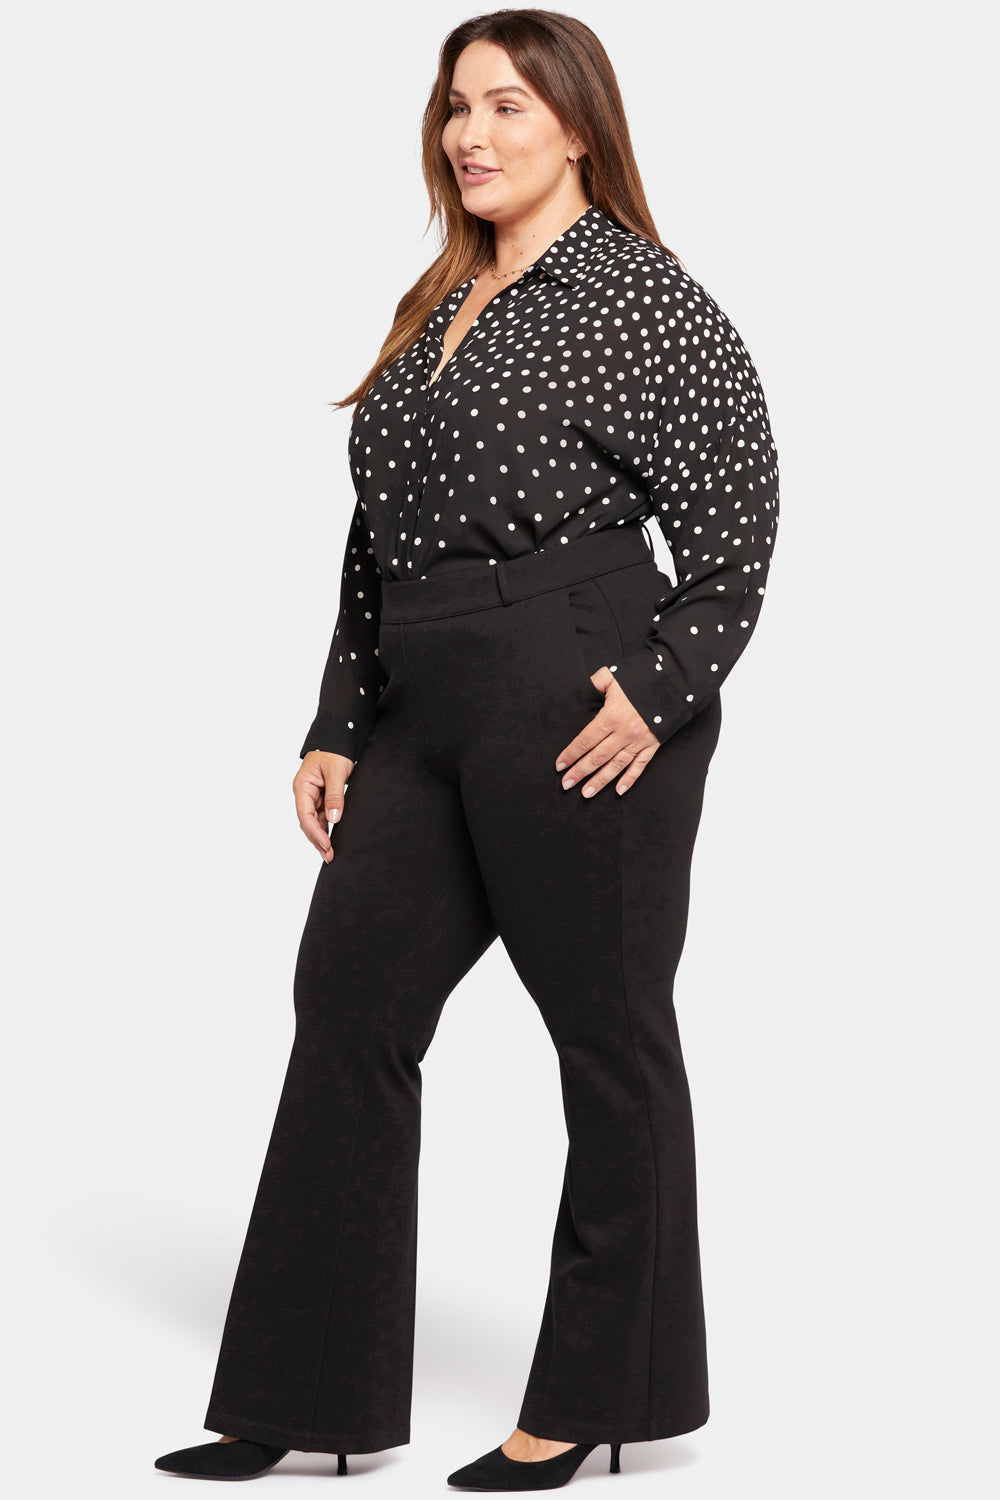 NYDJ Pull-On Flared Trouser Pants In Plus Size Sculpt-Her™ Collection - Black